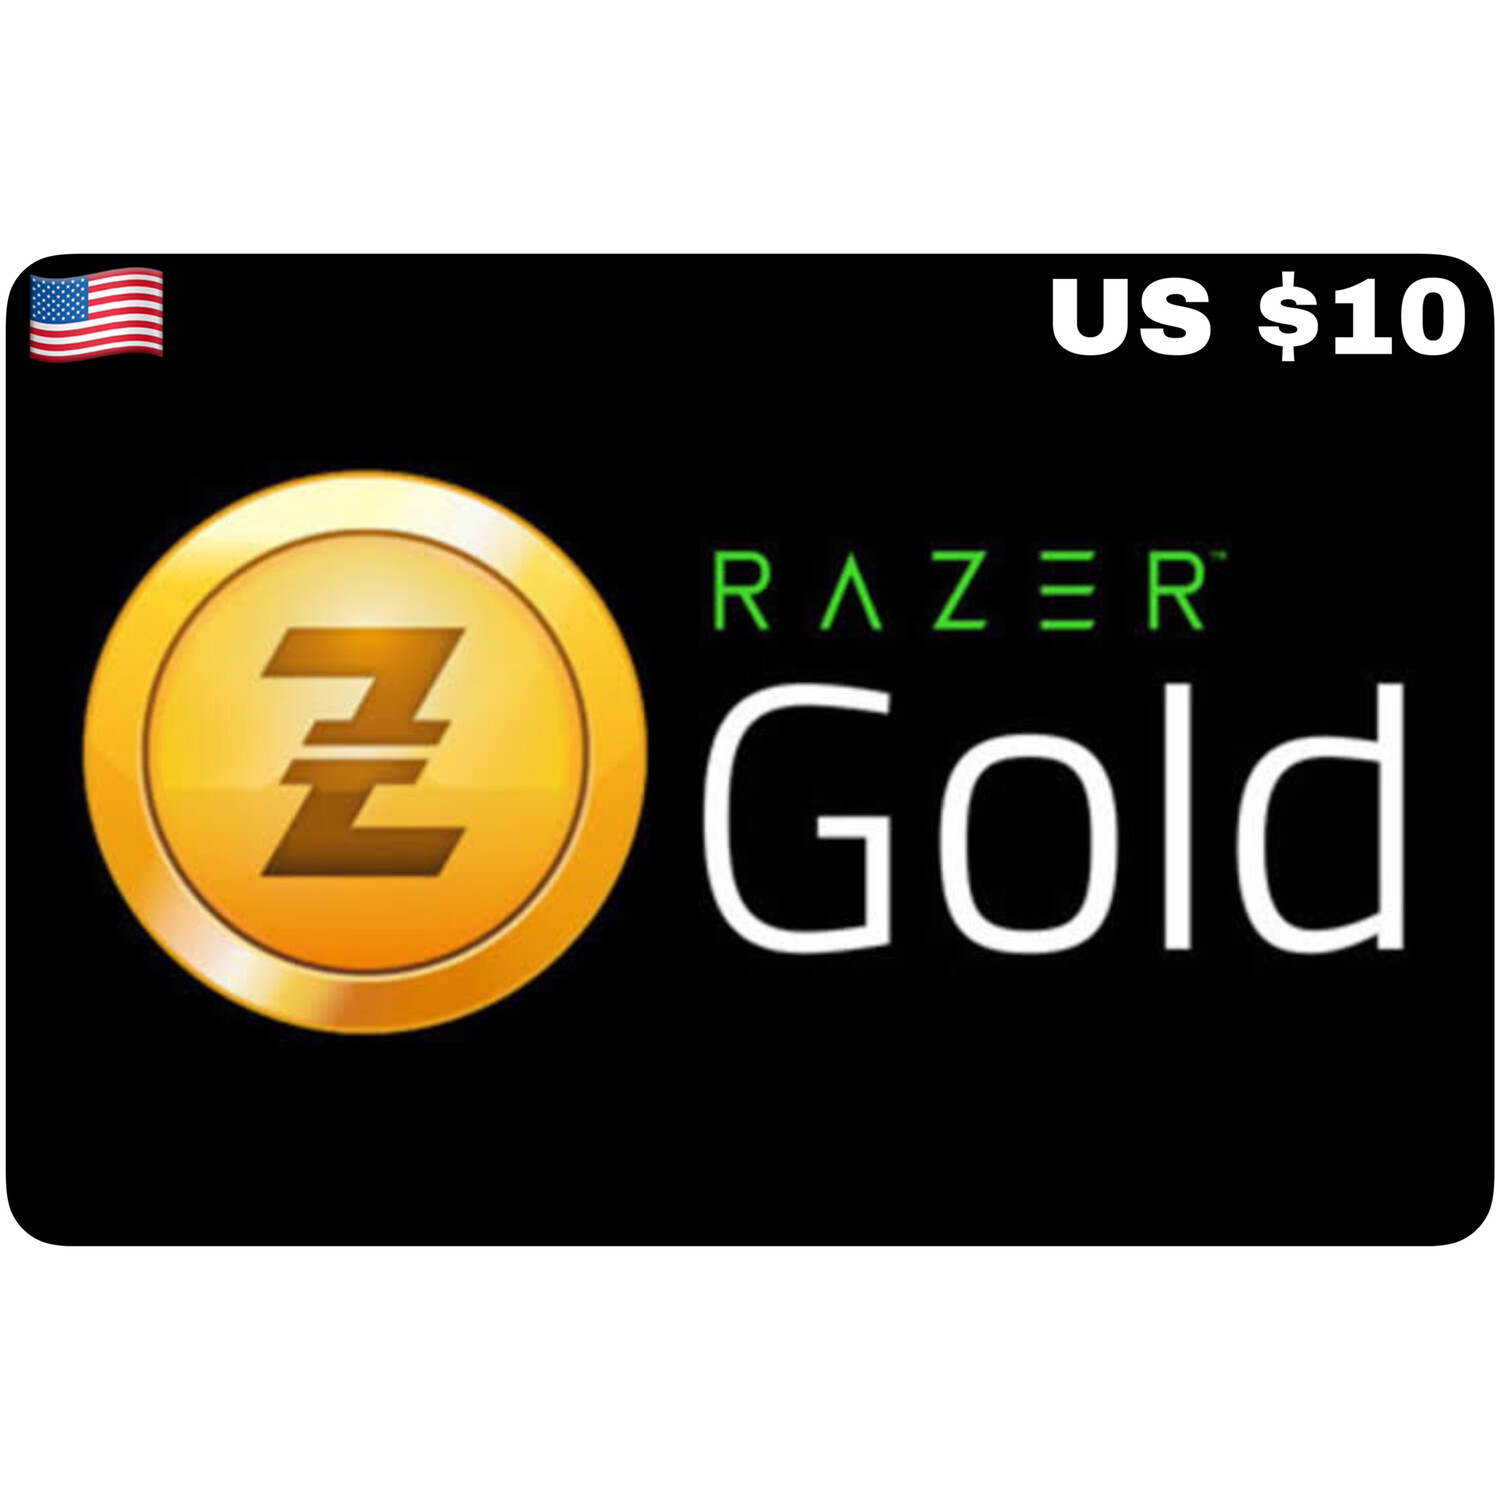 Razer Gold Pin US USD $10 With Serial Number